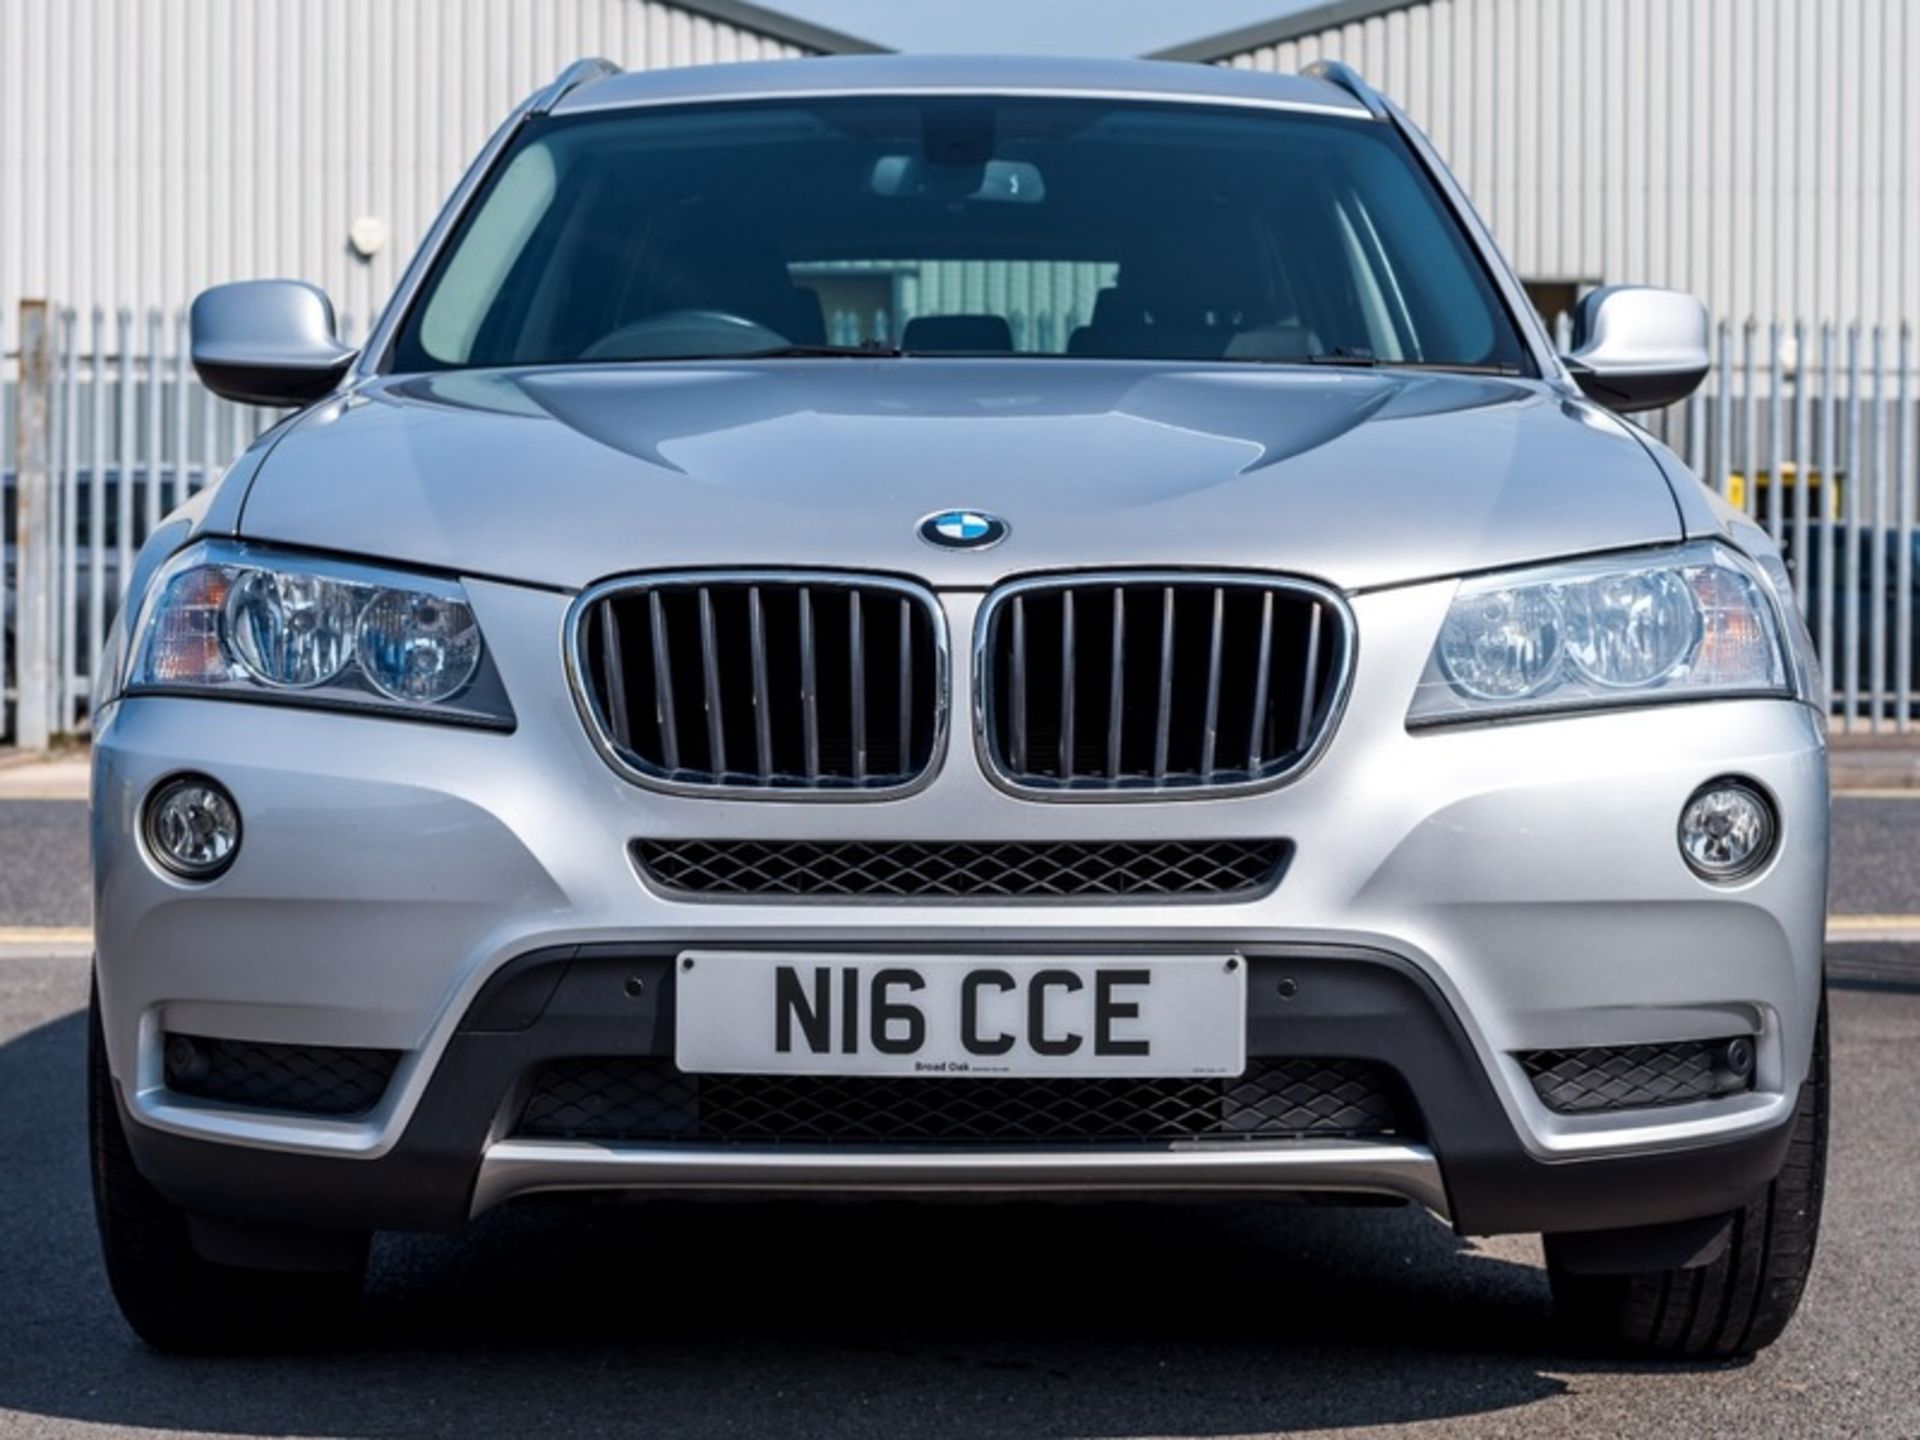 2012/62 REG BMW X3 XDRIVE 20D SE 2.0 DIESEL SILVER 4X4, SHOWING 4 FORMER KEEPERS *NO VAT* - Image 2 of 26